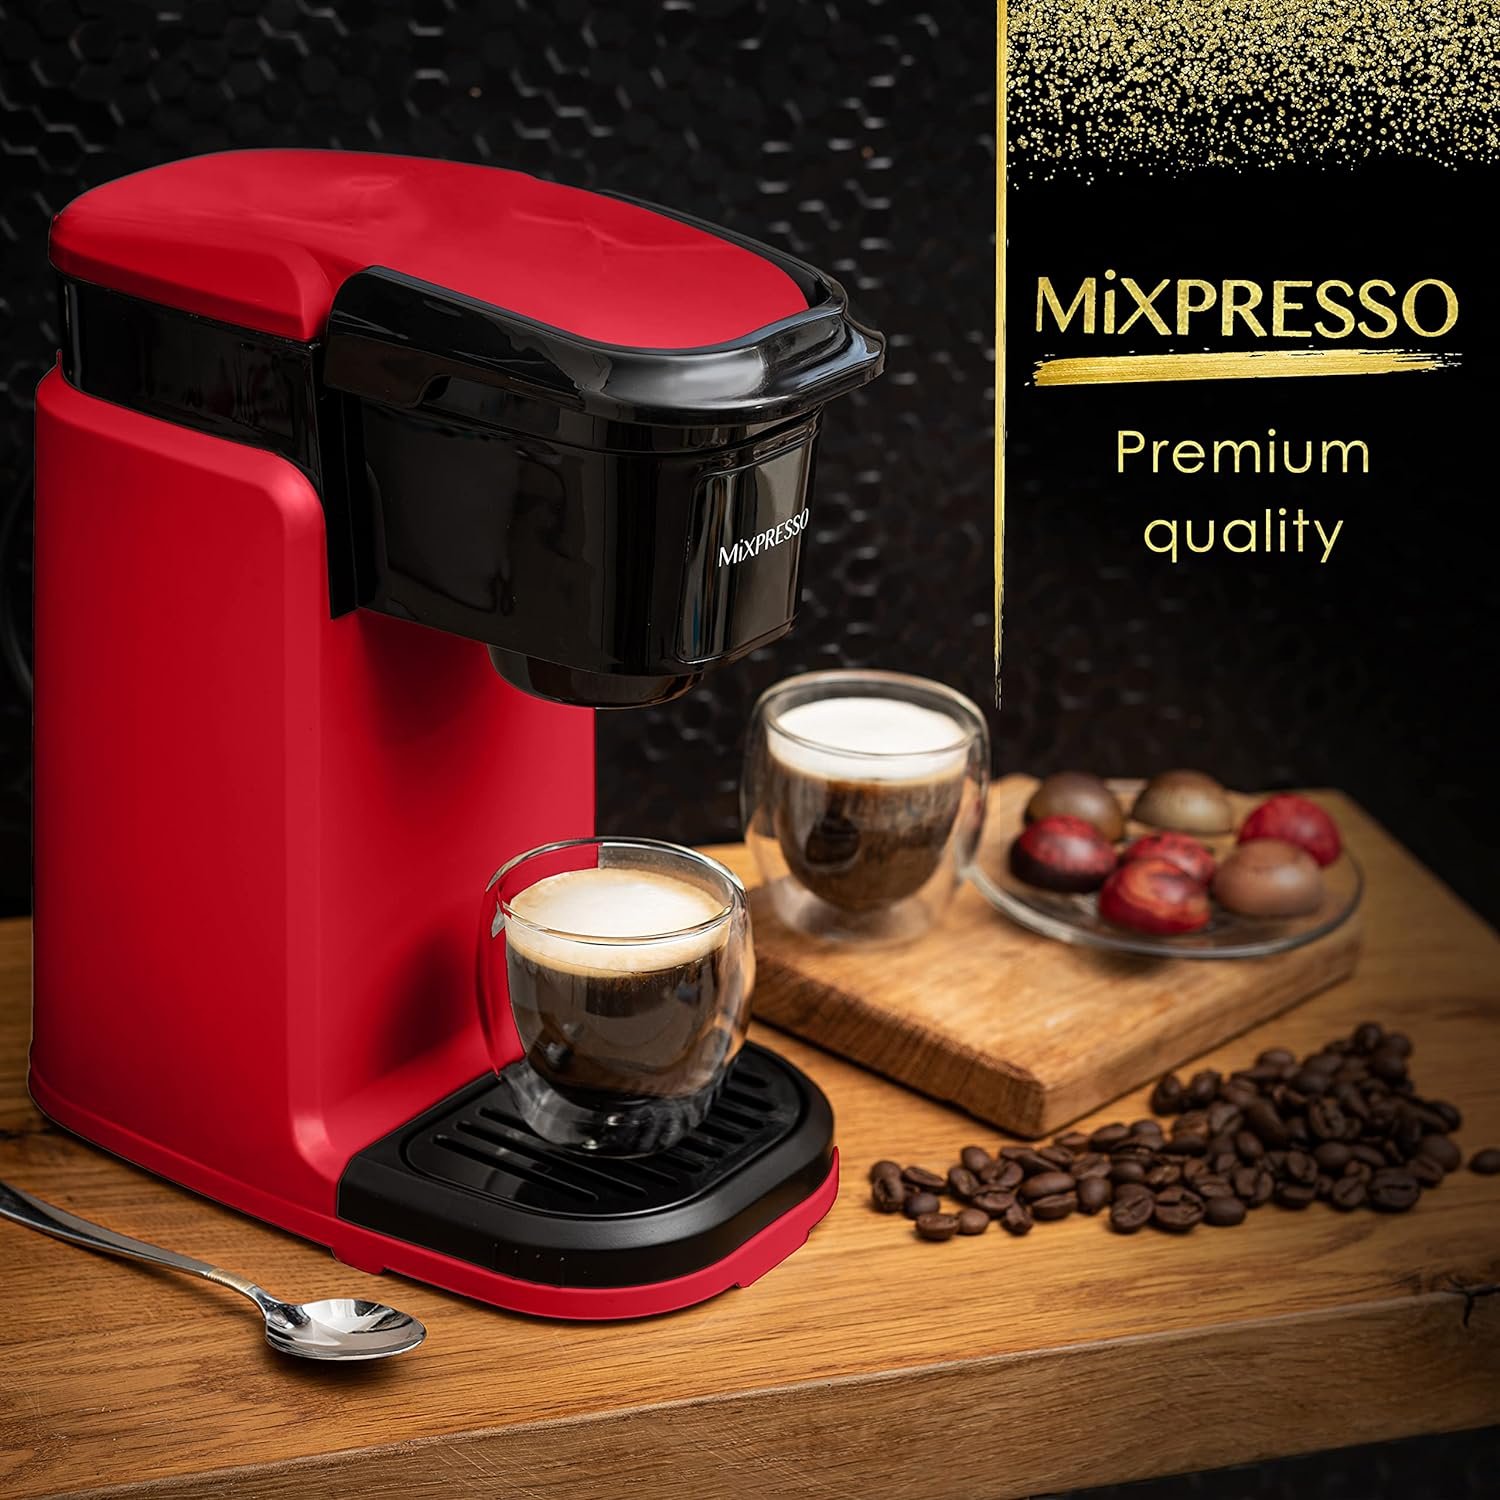 Mixpresso Single Cup Coffee Maker, Personal Single Serve Coffee Brewer Machine, Compatible with Single-Cups, Quick Brew Technology Programmable Features, One Touch Function Black Coffee Maker